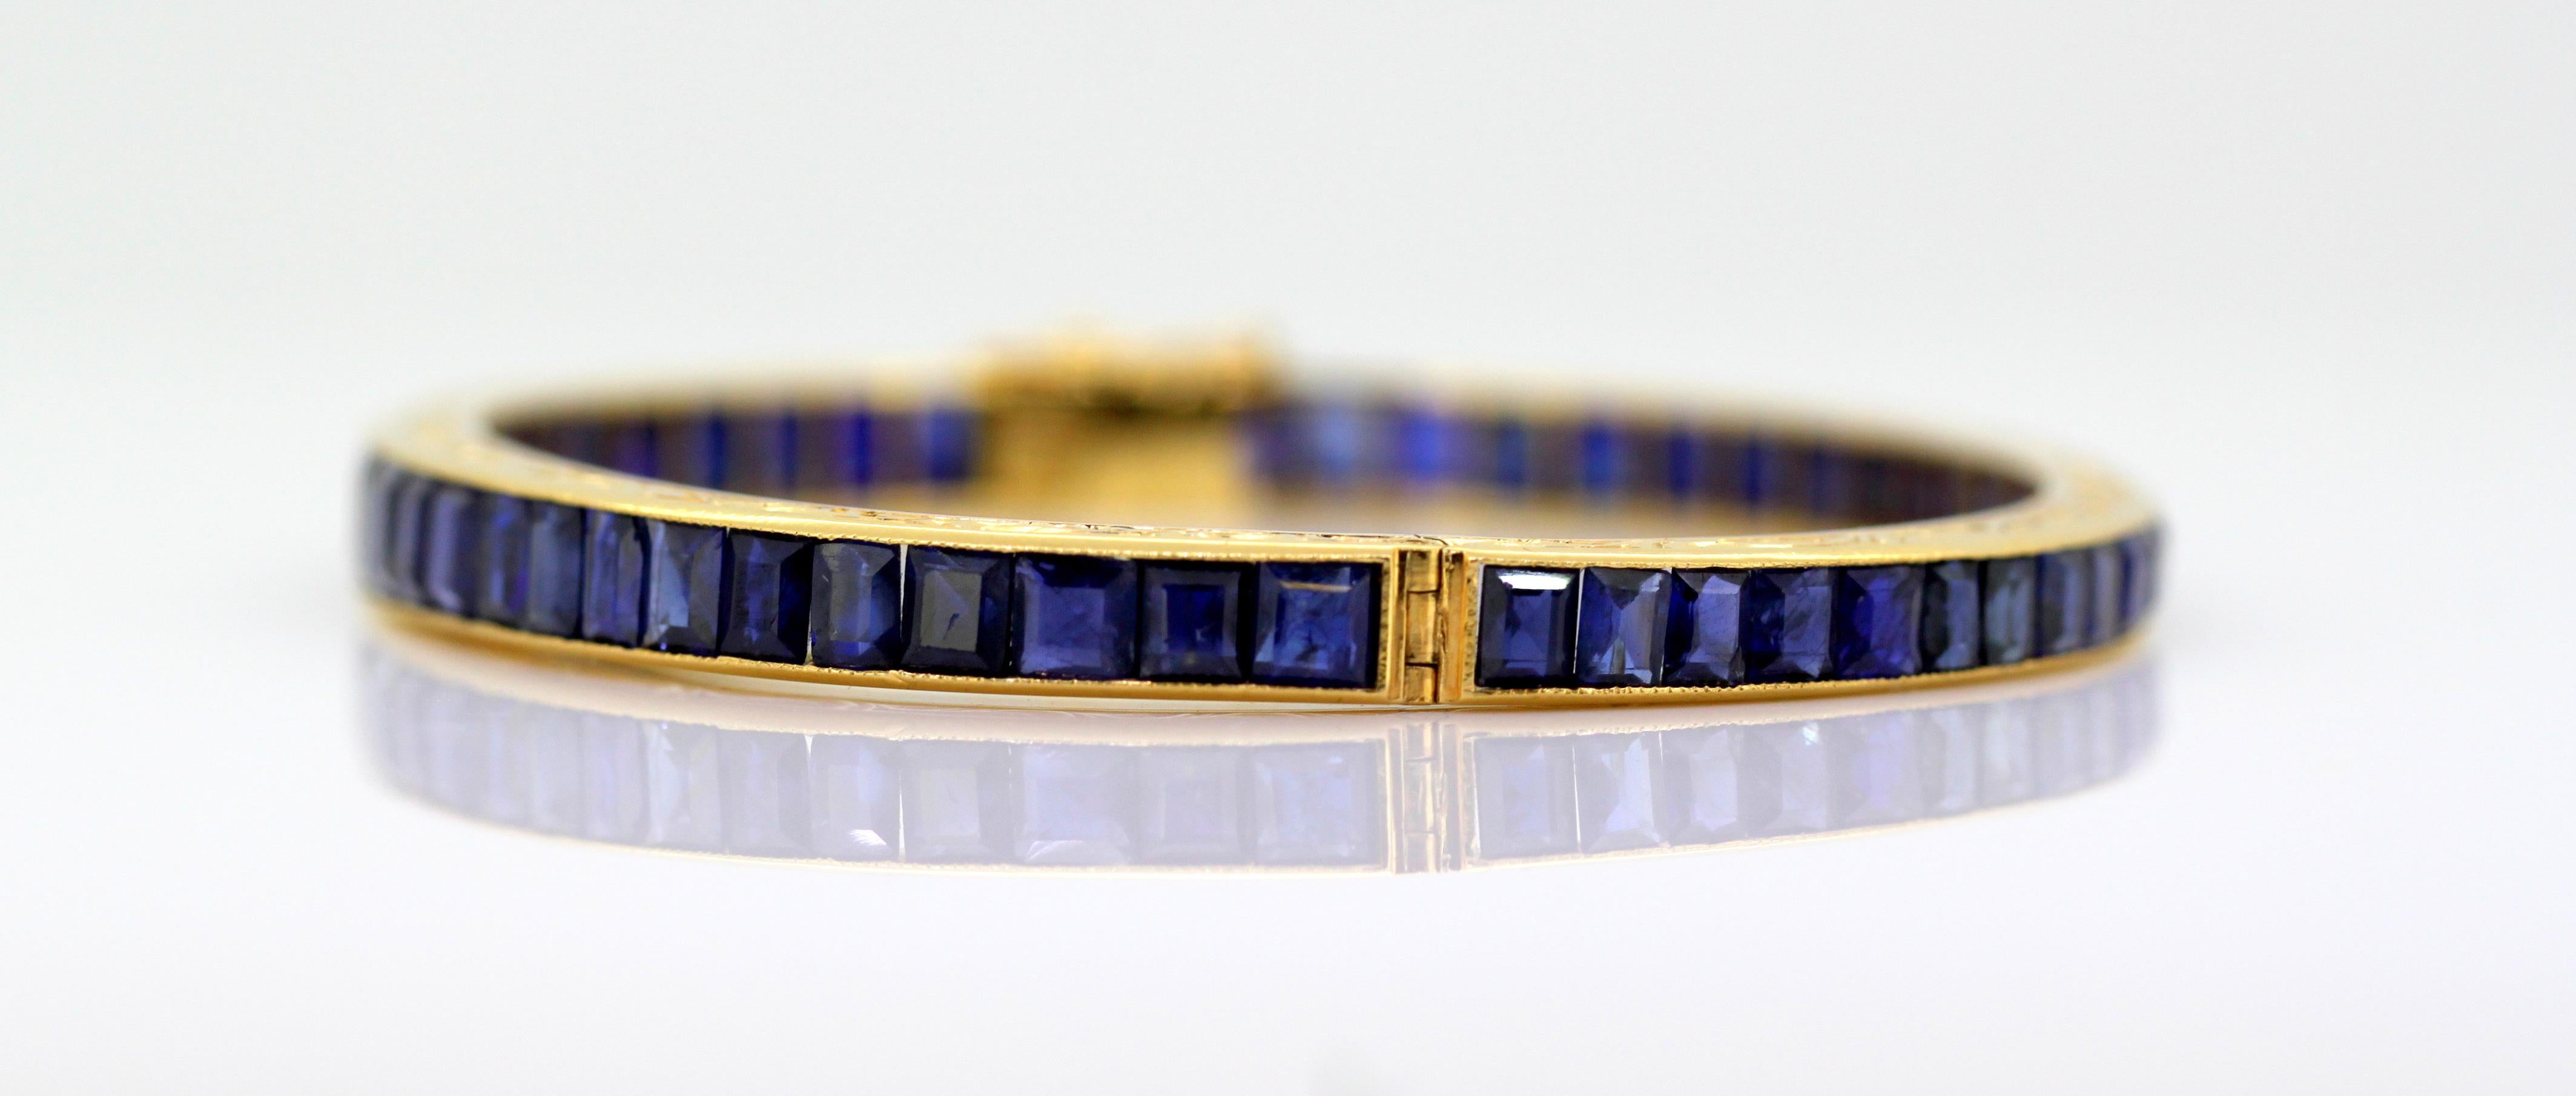 Women's Antique Art Deco 18 Karat Gold Ladies Bangle with Sapphires Made in France, 1920